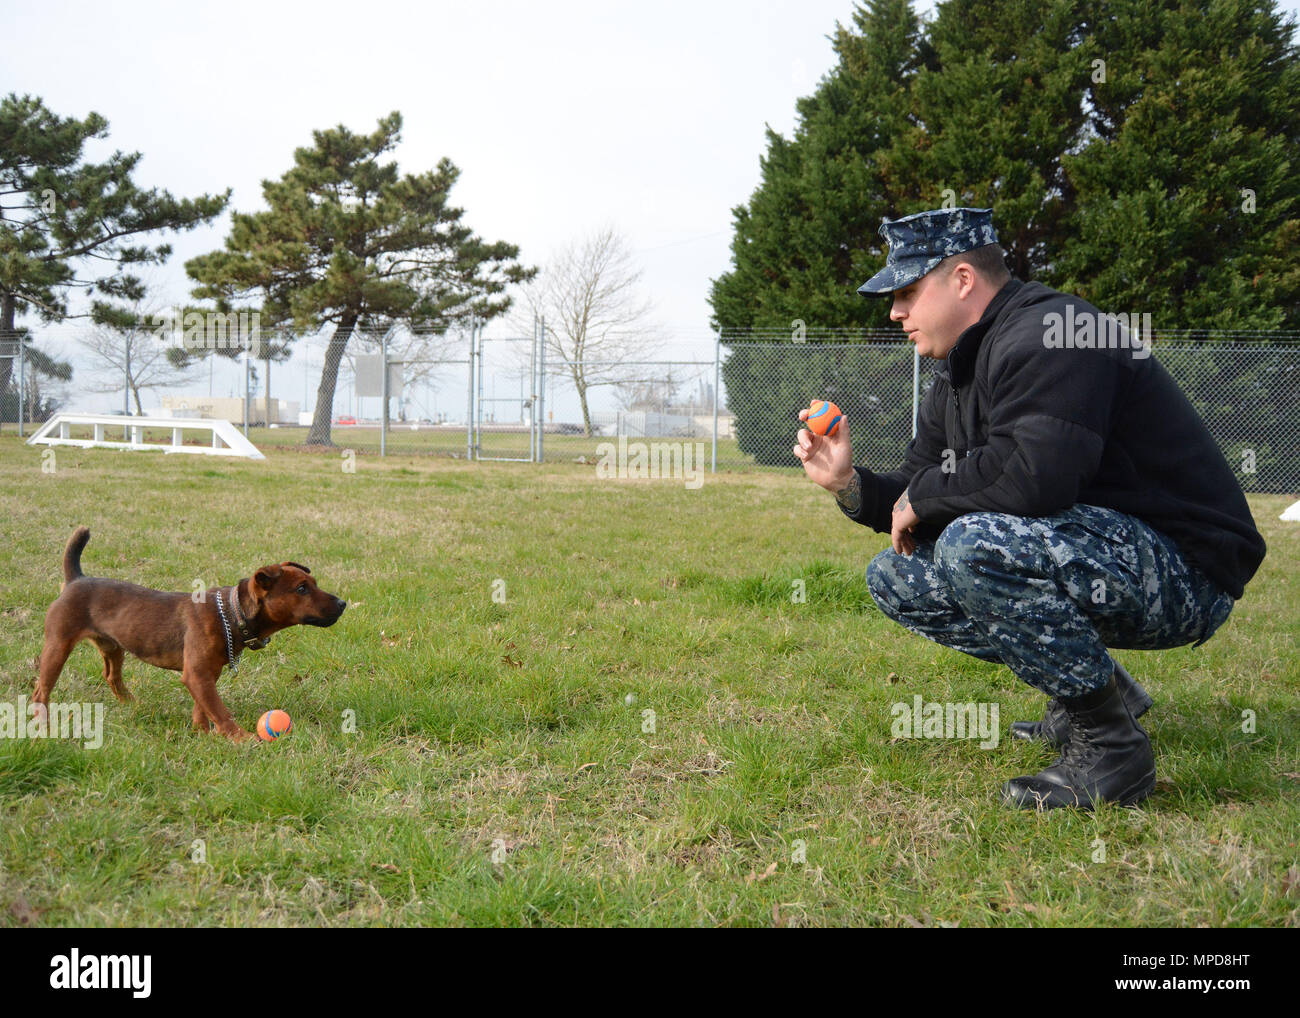 170201-N-OW828-001 NORFOLK (Feb. 1, 2017) - Master-At-Arms 2nd Class Jordyn Japec, Military Working Dog Handler and Puskos, a Jagdterrier MWD Drug Detector, begin the certification process Jan. 26 to include obedience training and narcotic detector training at Naval Station Norfolk.  (U.S. Navy photo by Mass Communication Specialist 3rd Class Jeanyra A. Mateo/Released) Stock Photo